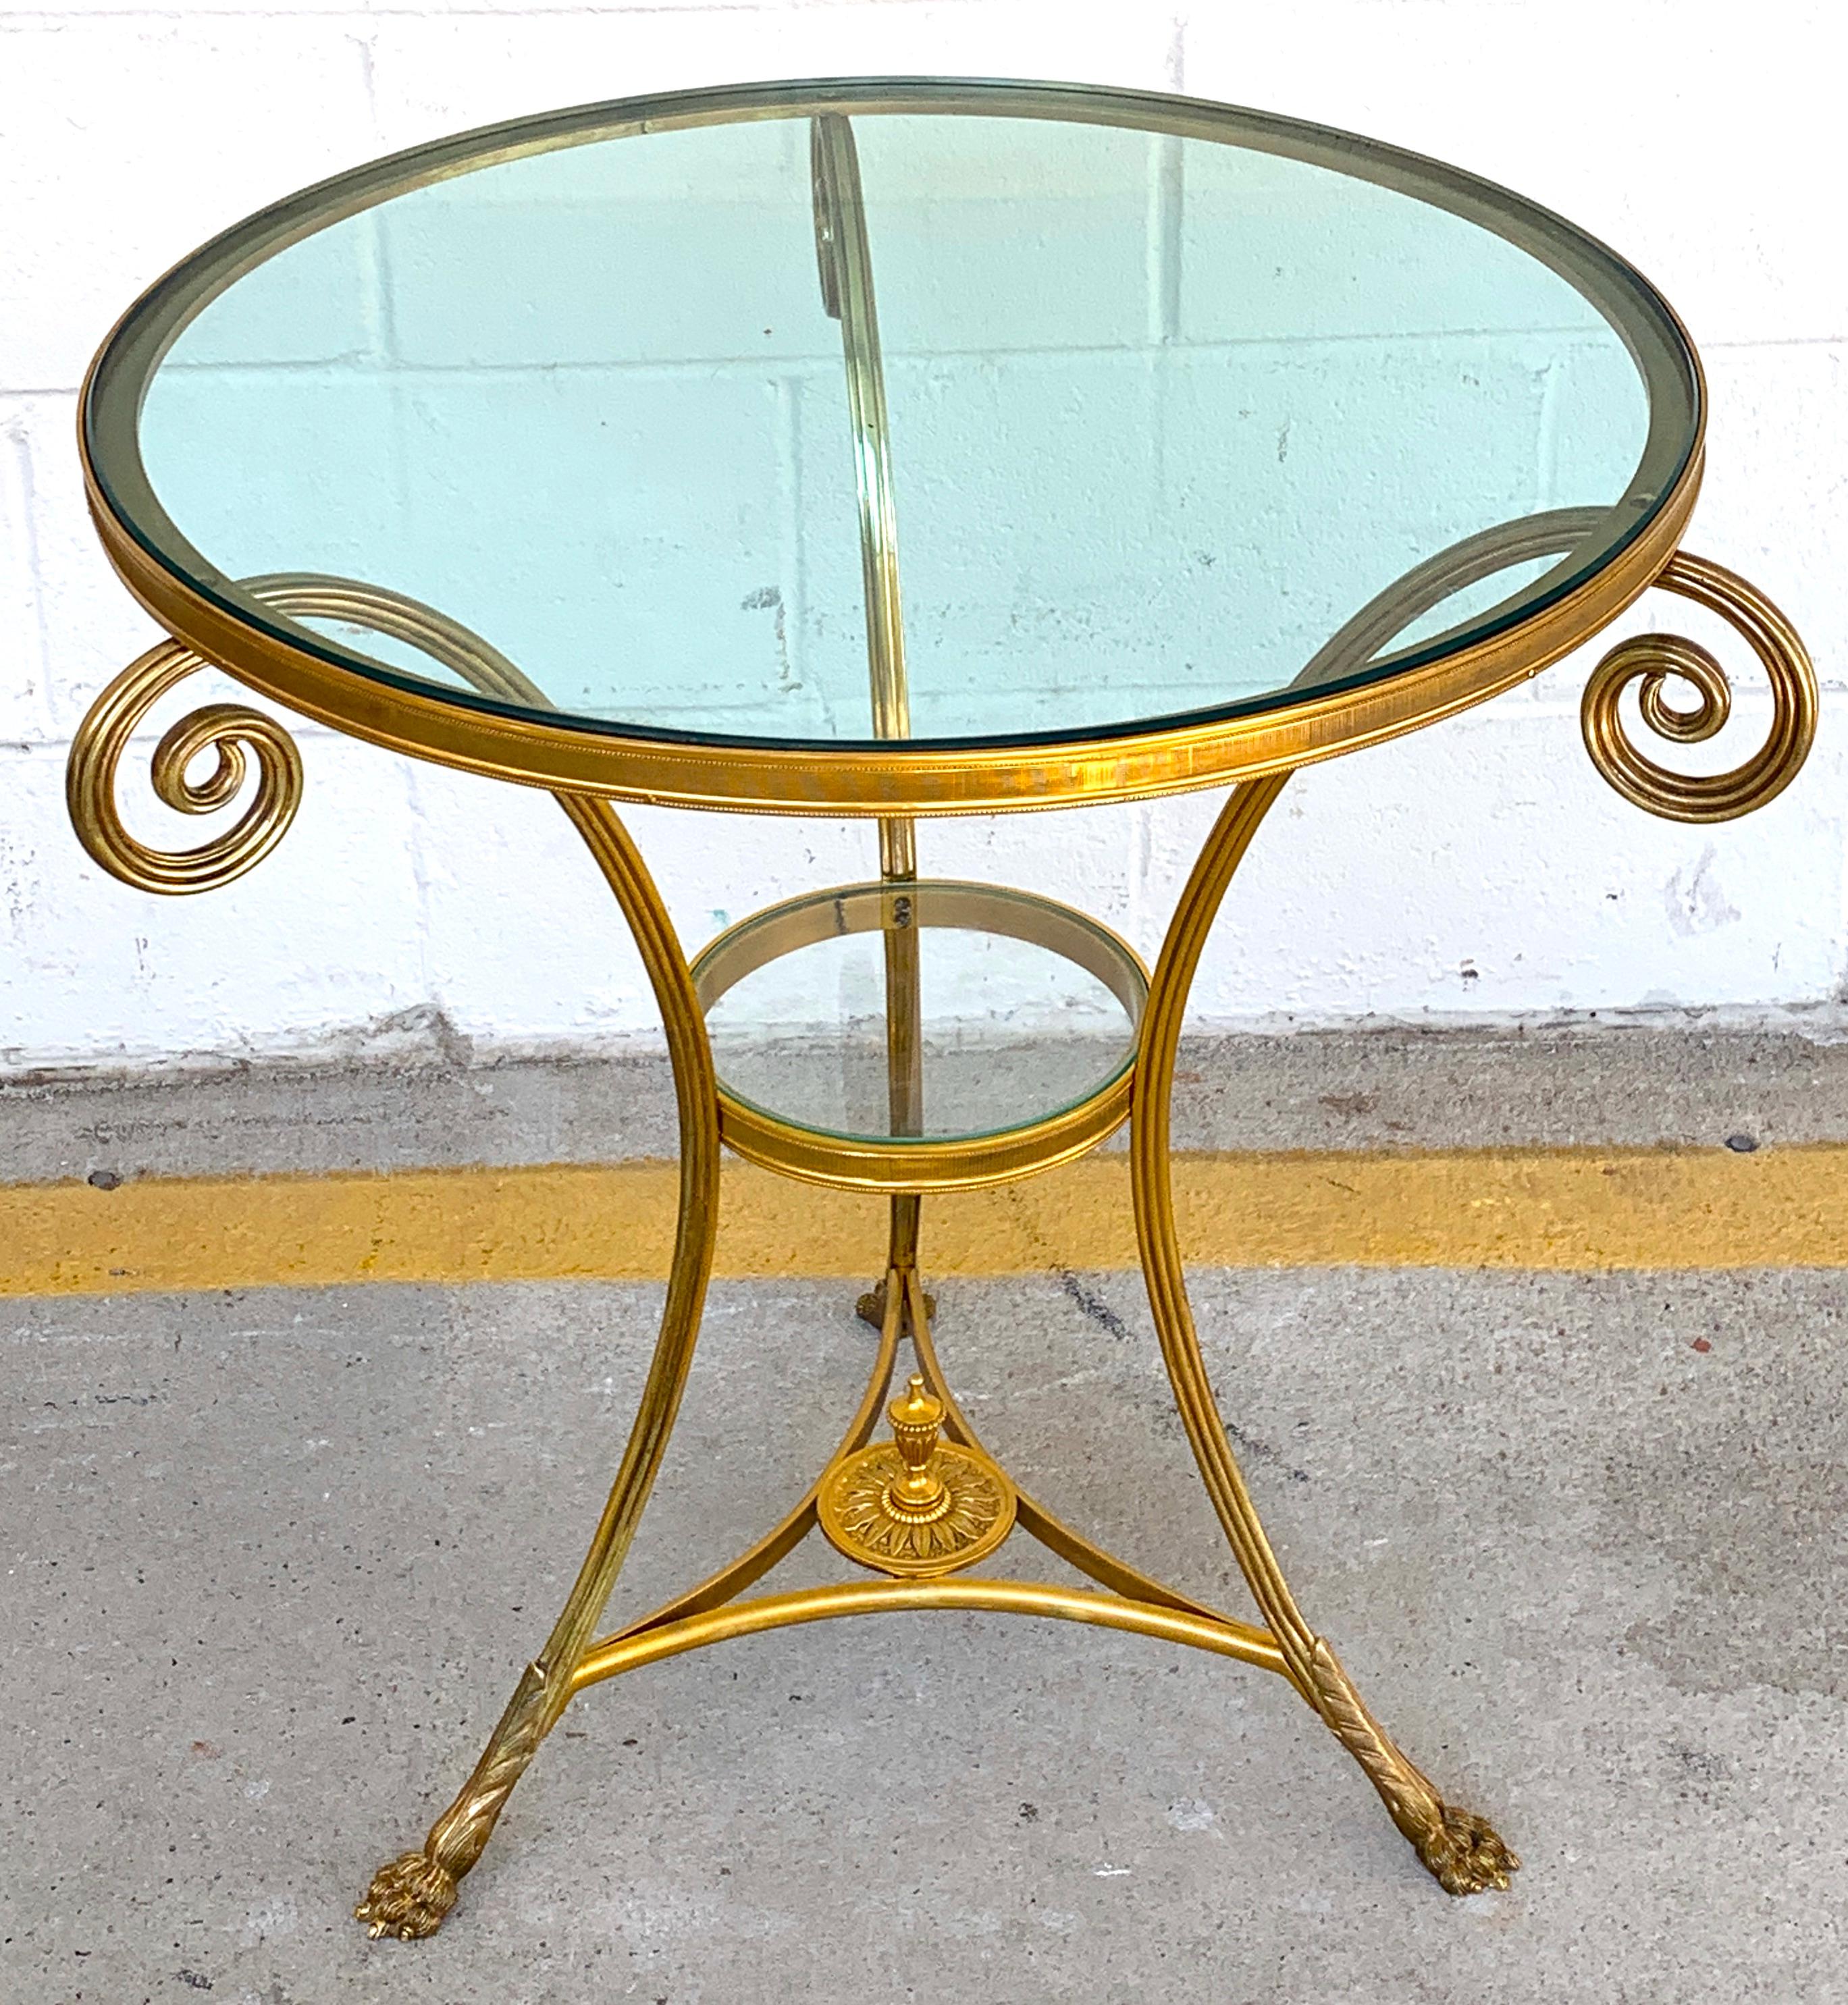 Louis XVI style Ormolu & Baccarat (Attributed ) glass gueridon, of typical form, with thick inset beveled 24 inch diameter crystal roundall, this not commercial glass. The second tier has a 8-inch diameter removable glass shelf, the crystal top is